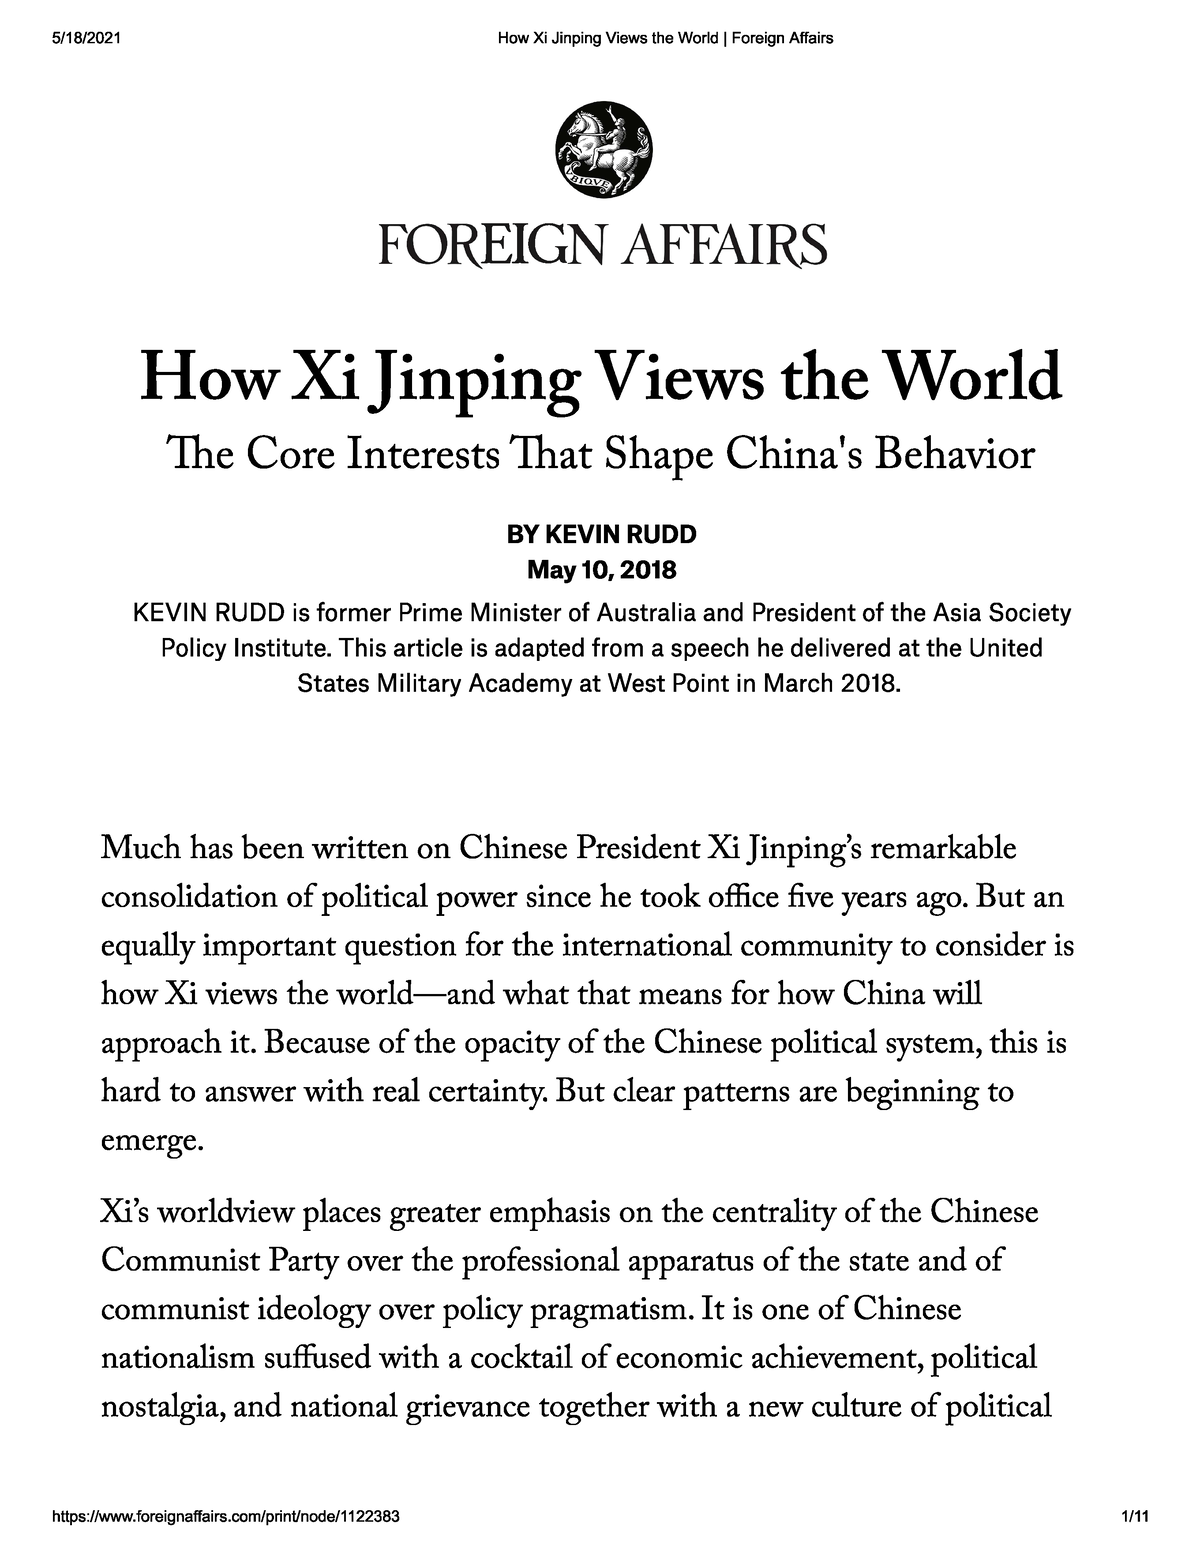 essay about xi jinping